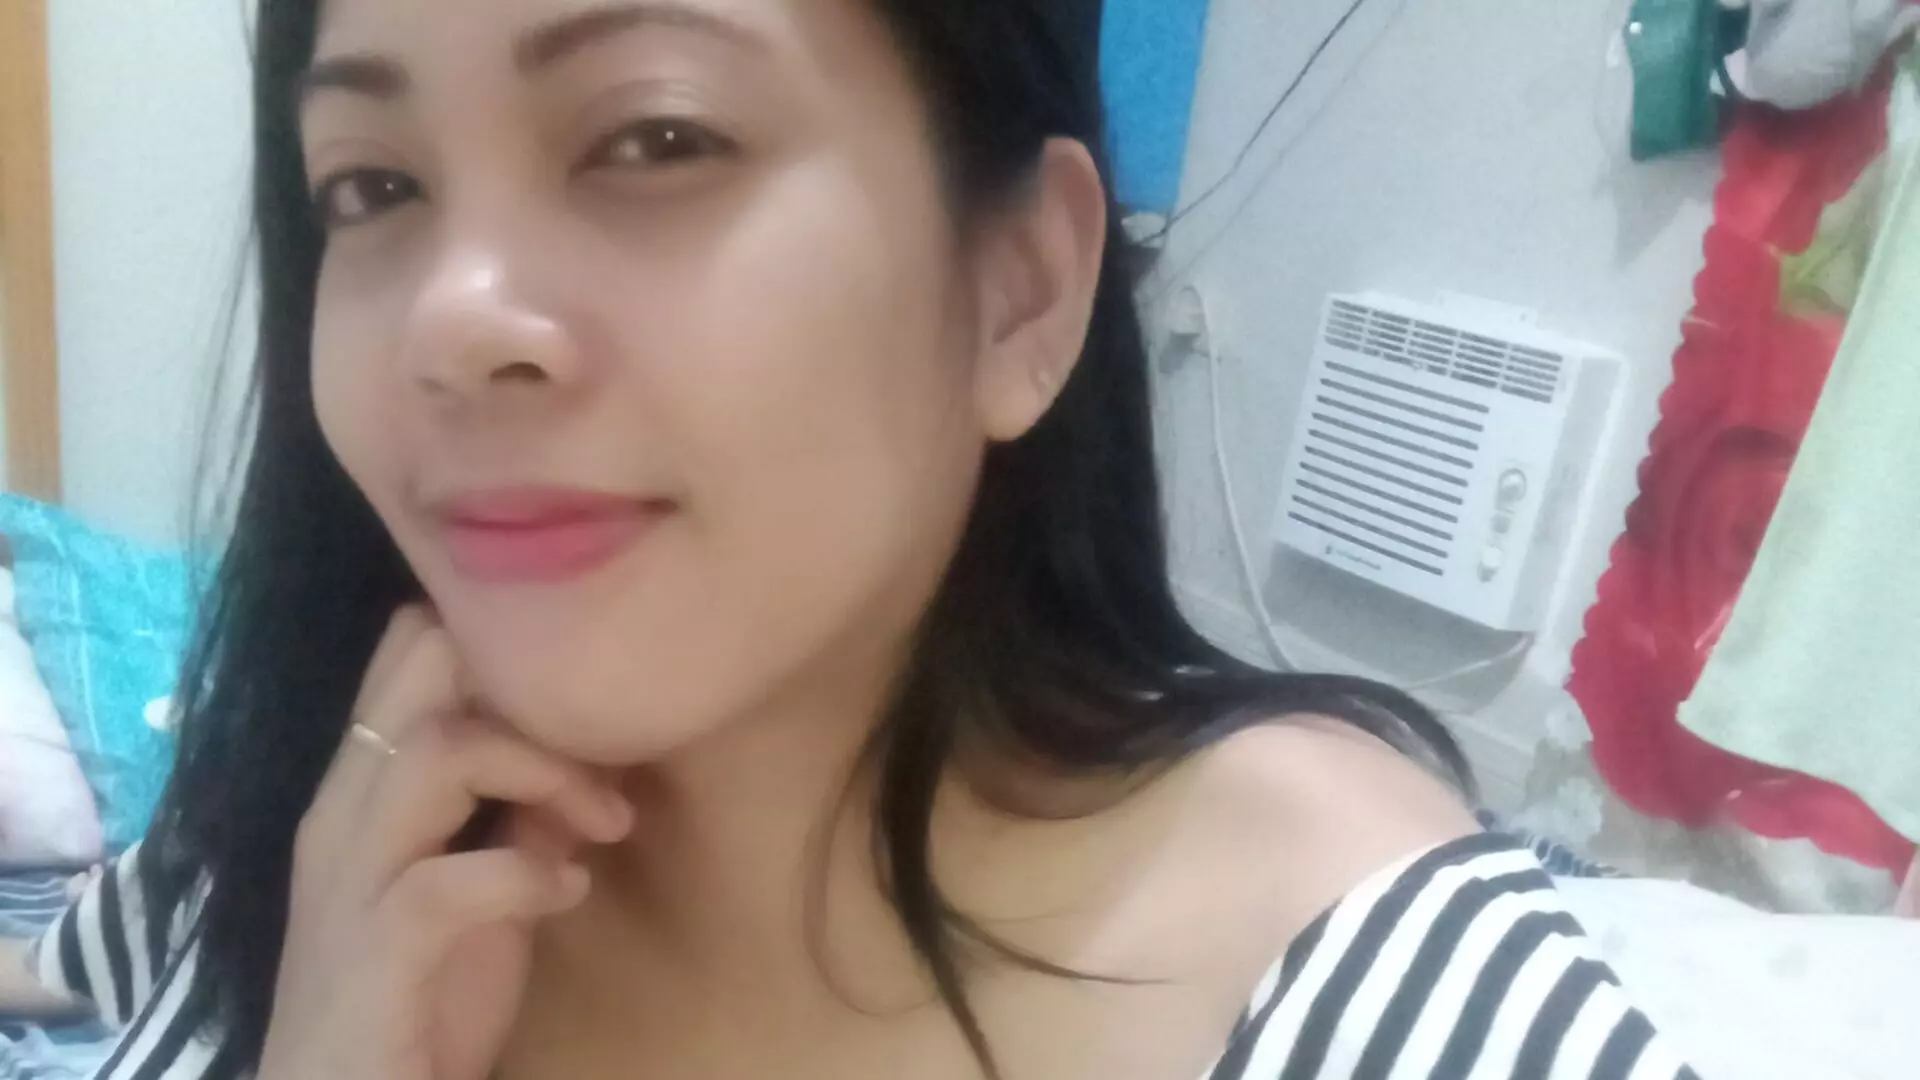 Join MagnaGuadalupe Private Chat